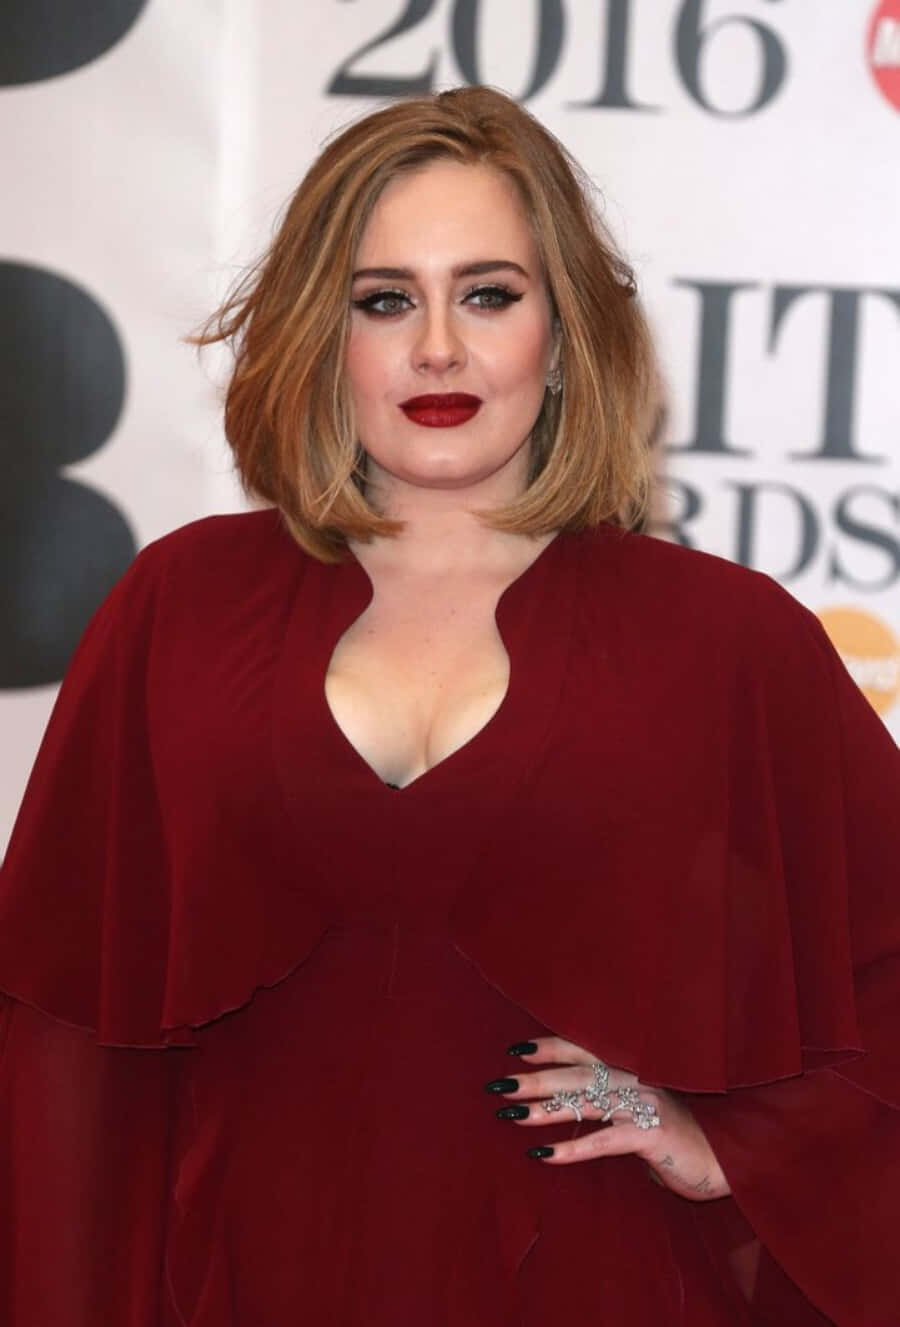 Adele at the BRIT Awards